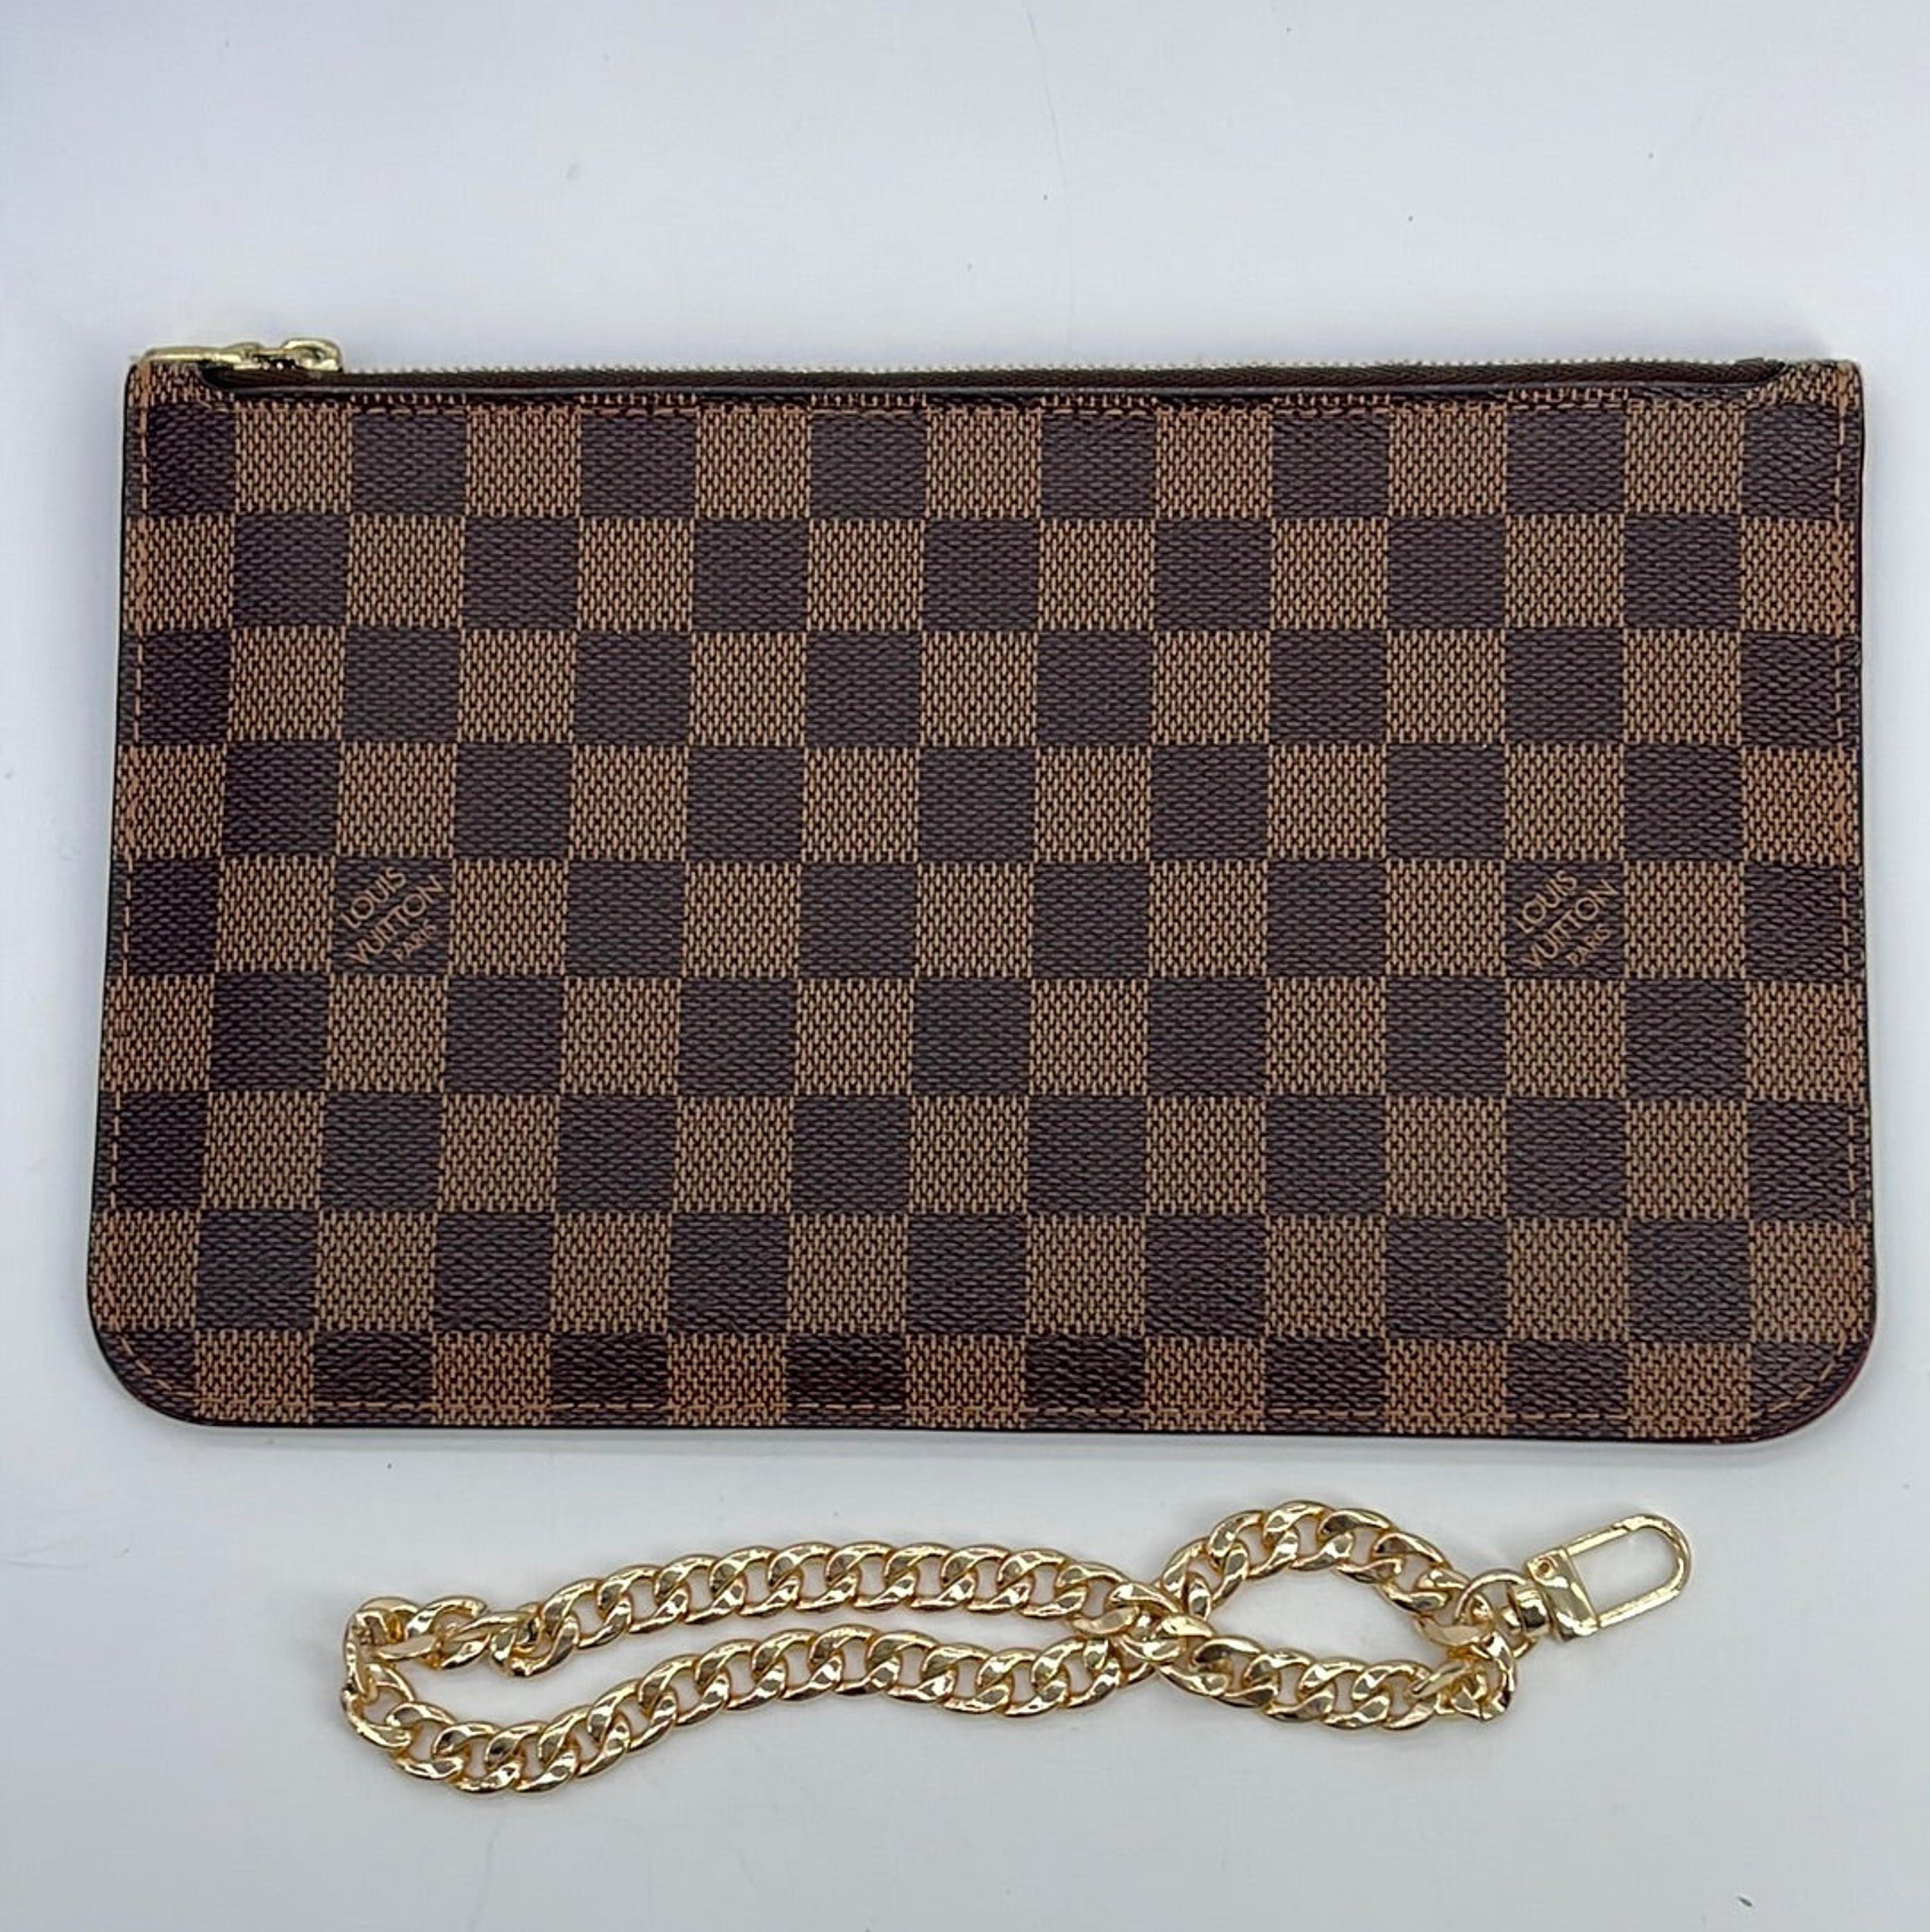 NTWRK - Preloved Louis Vuitton Damier Ebene Neverfull GM Pouch with Red